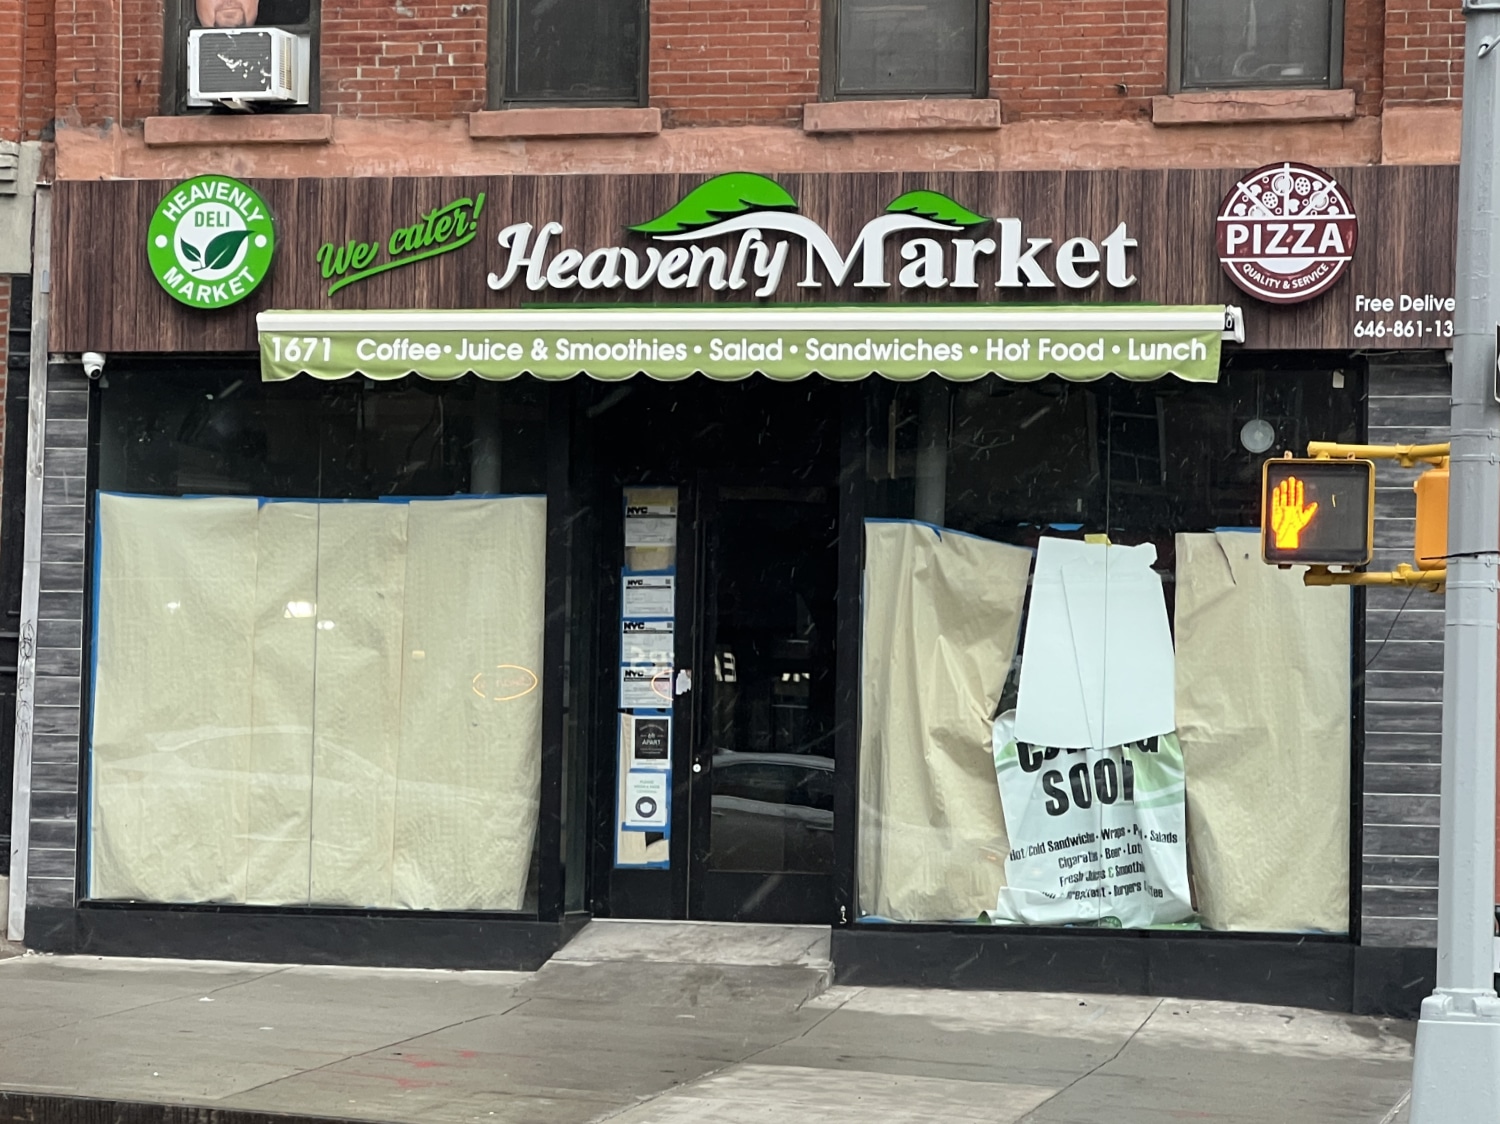 Heavenly Market's new location at East 88th Street & York Avenue opens soon